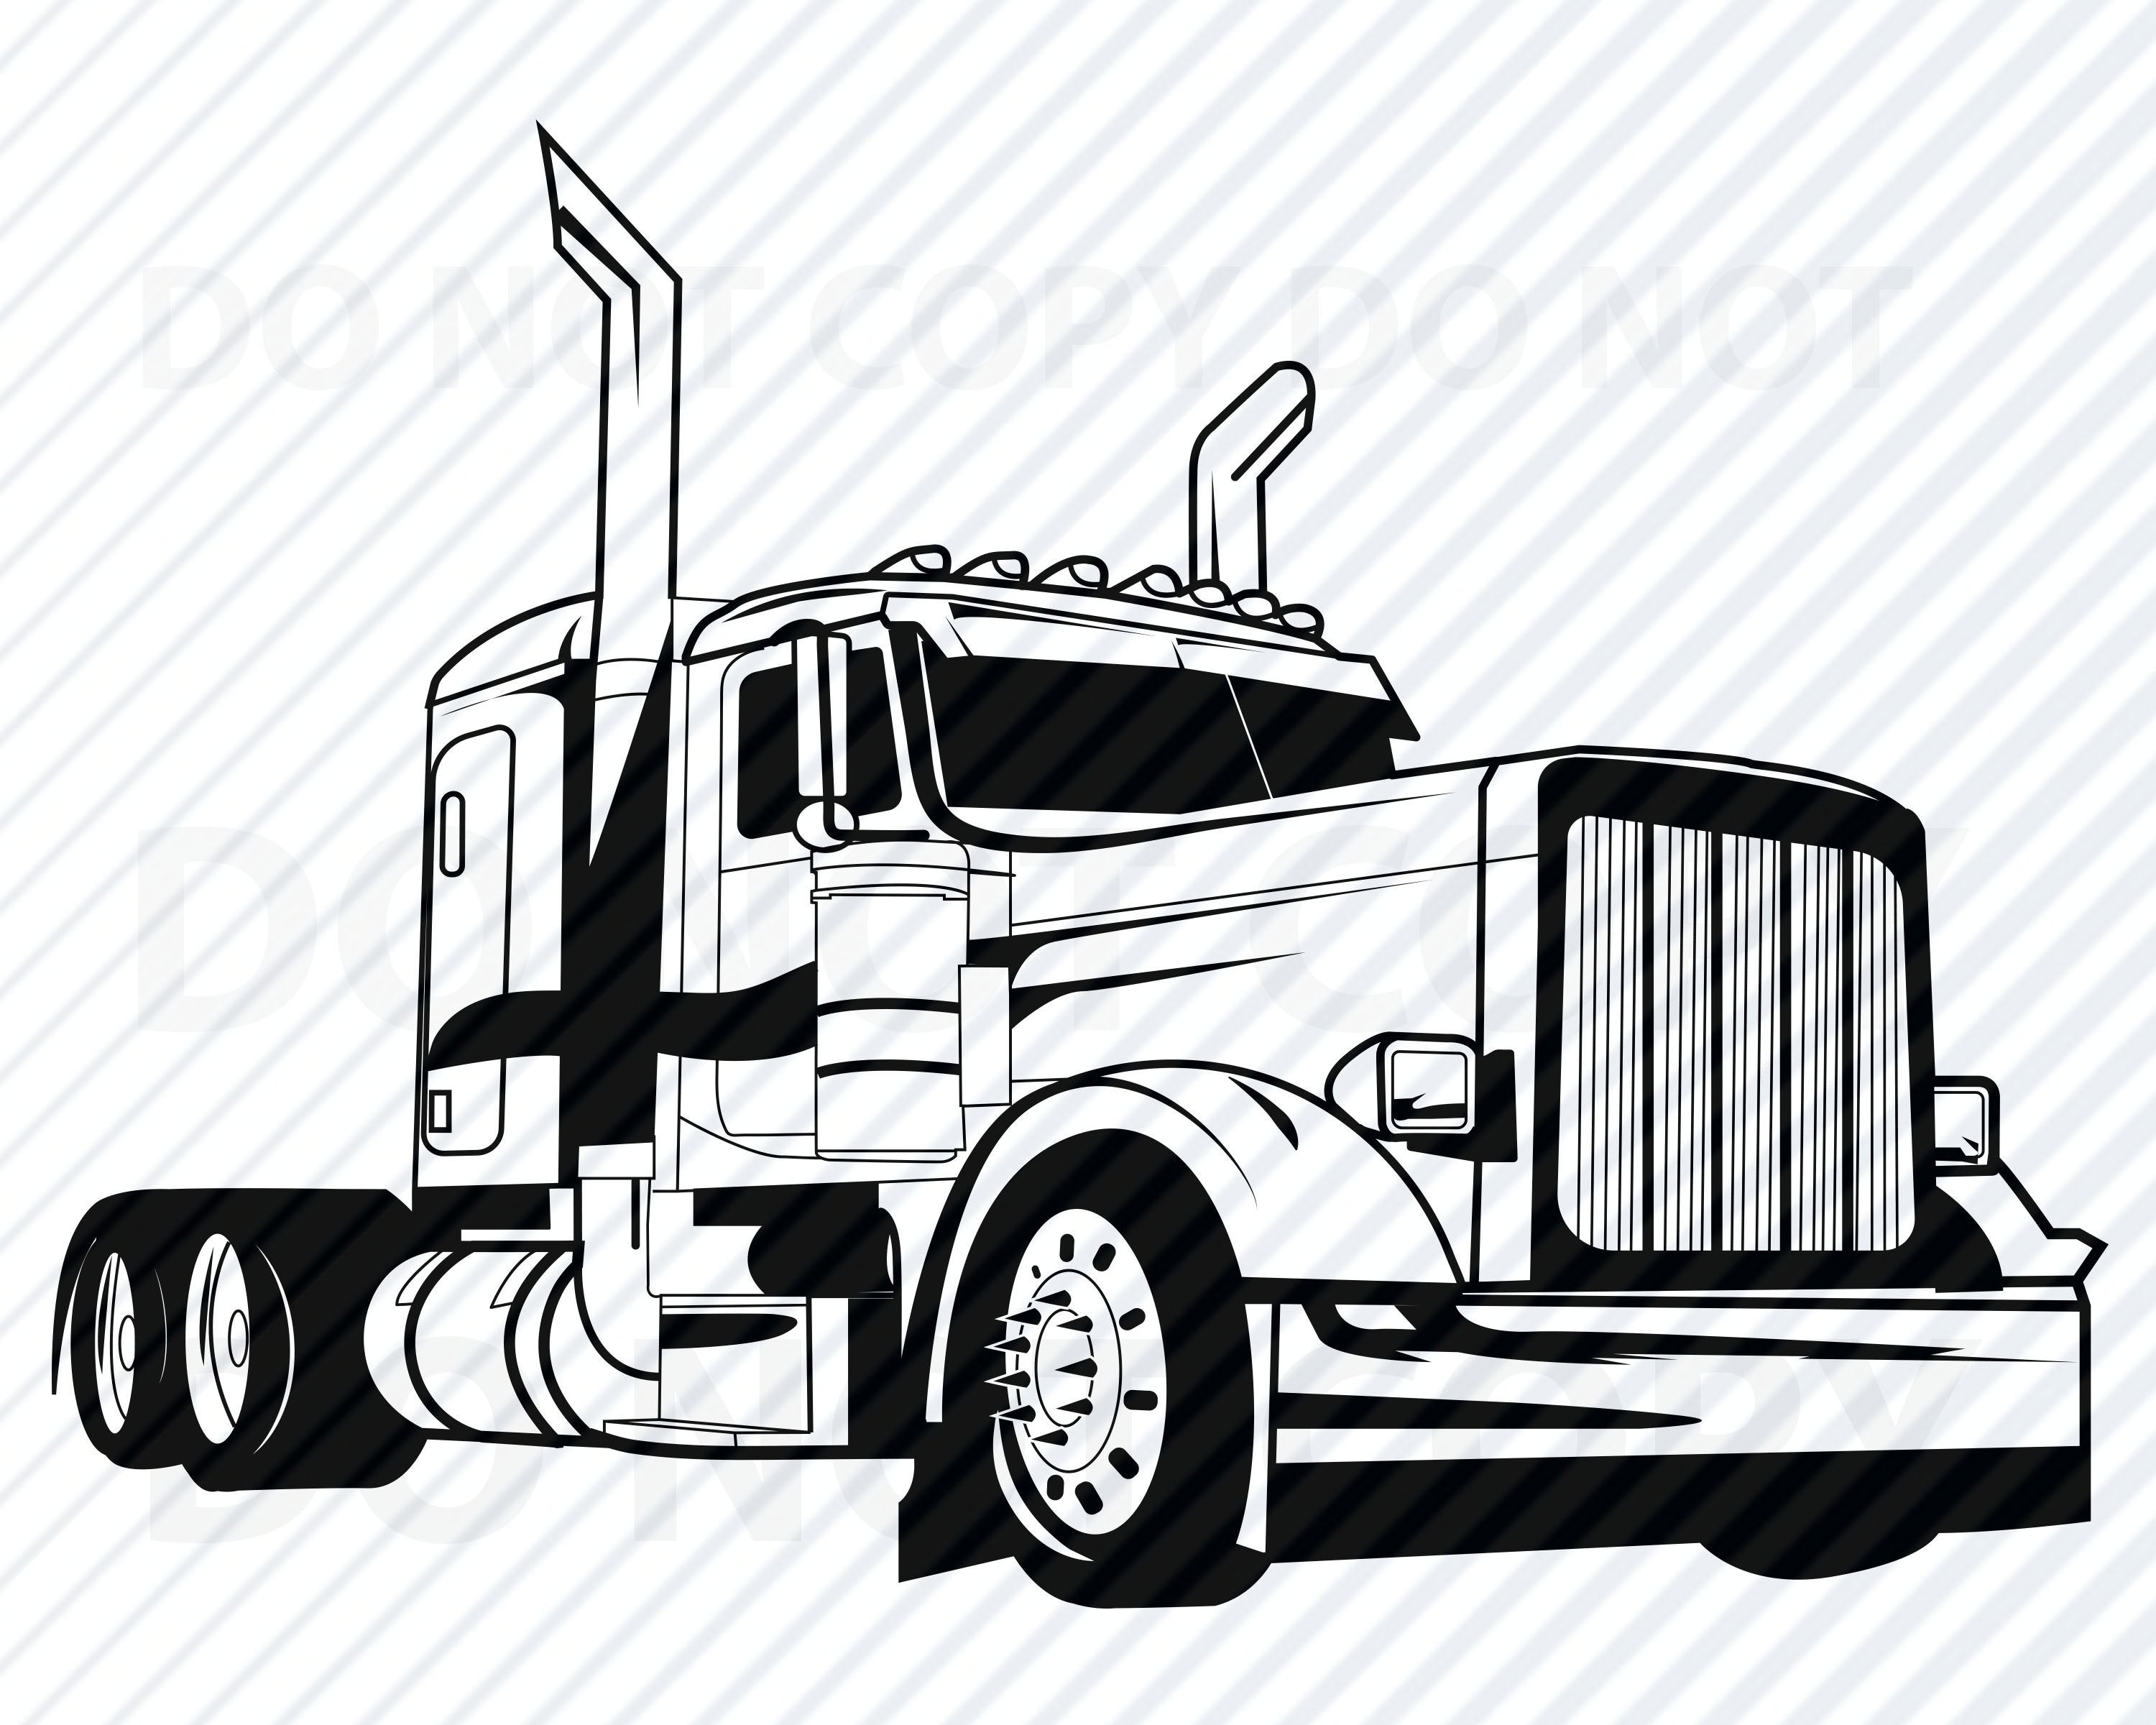 Download Truck Silhouette Vector at Vectorified.com | Collection of Truck Silhouette Vector free for ...